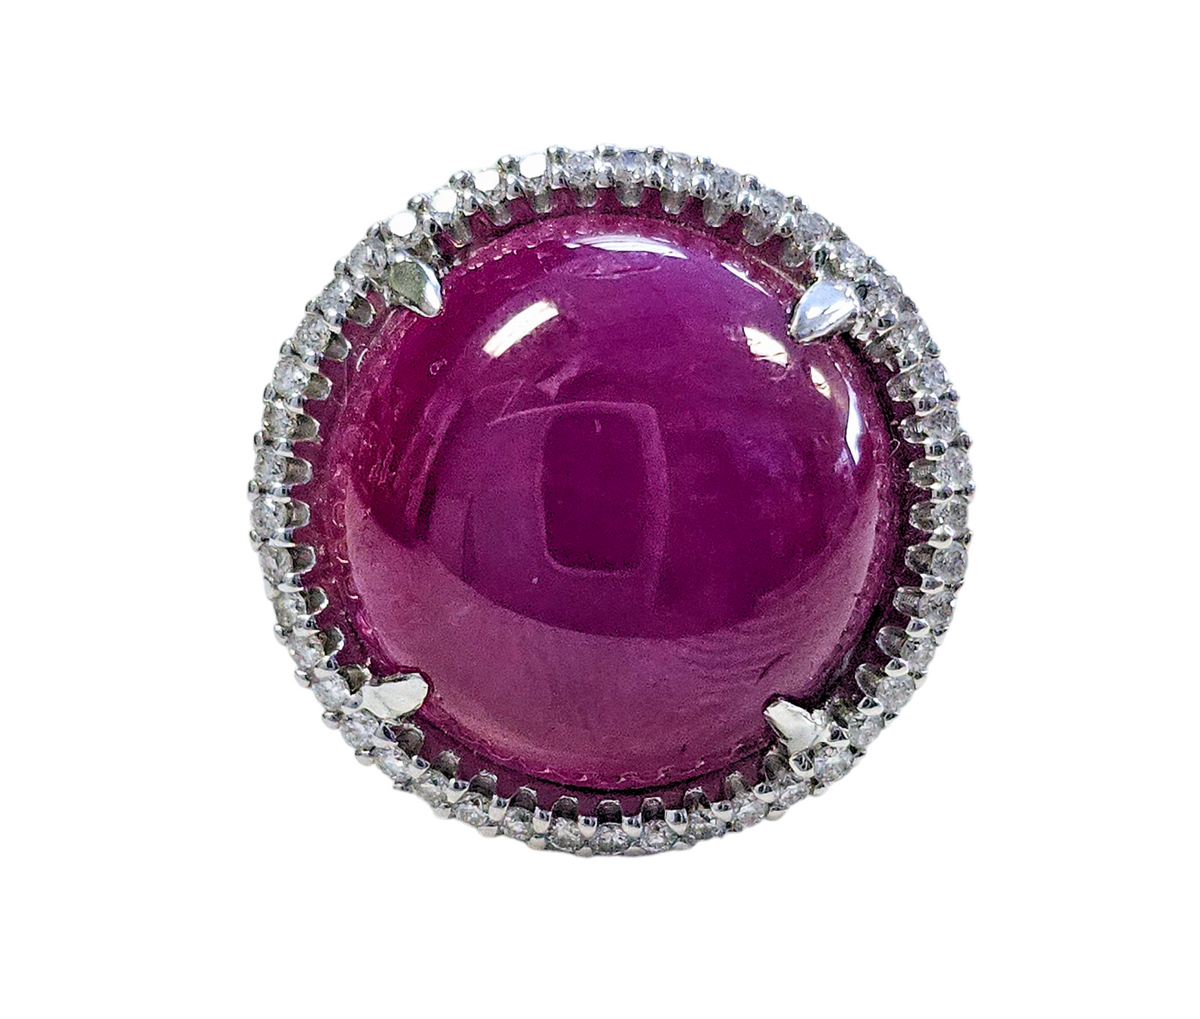 Cabochon Star Ruby with Diamond Halo Ring made in 18-Karat White Gold